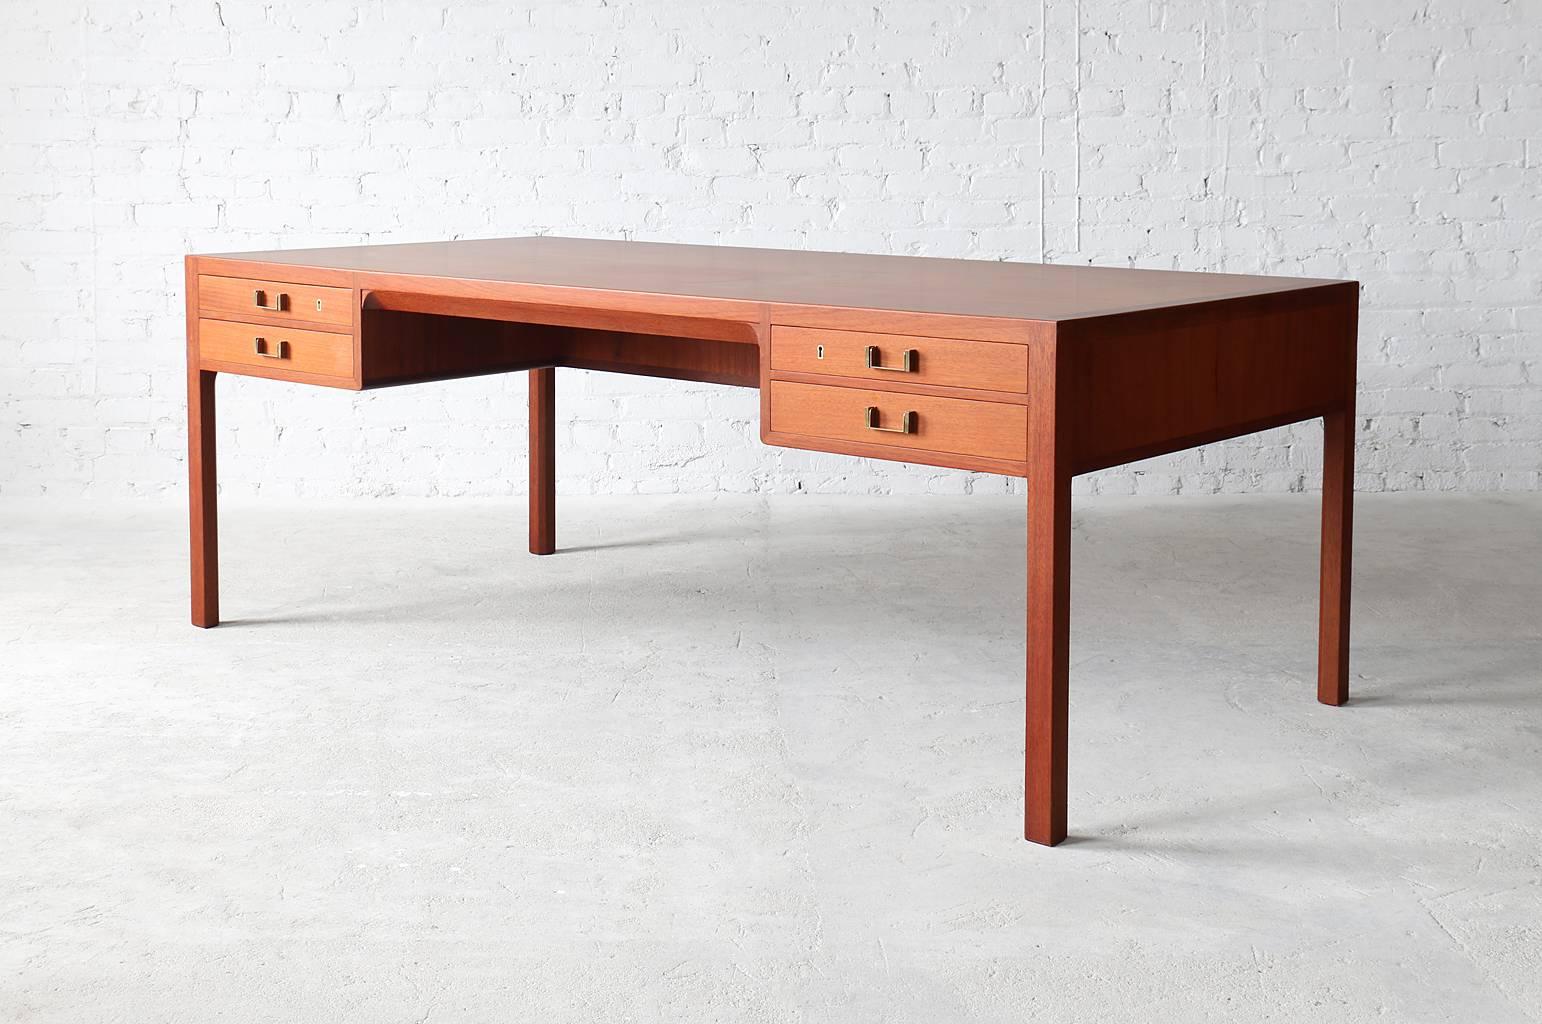 A stunning Danish modern mahogany executive desk designed and manufactured by Søren Horn. Solid mahogany legs and frame along with solid oak drawers joined with dovetails make this an exceptionally well crafted piece. Stamped by Søren Horn.

-